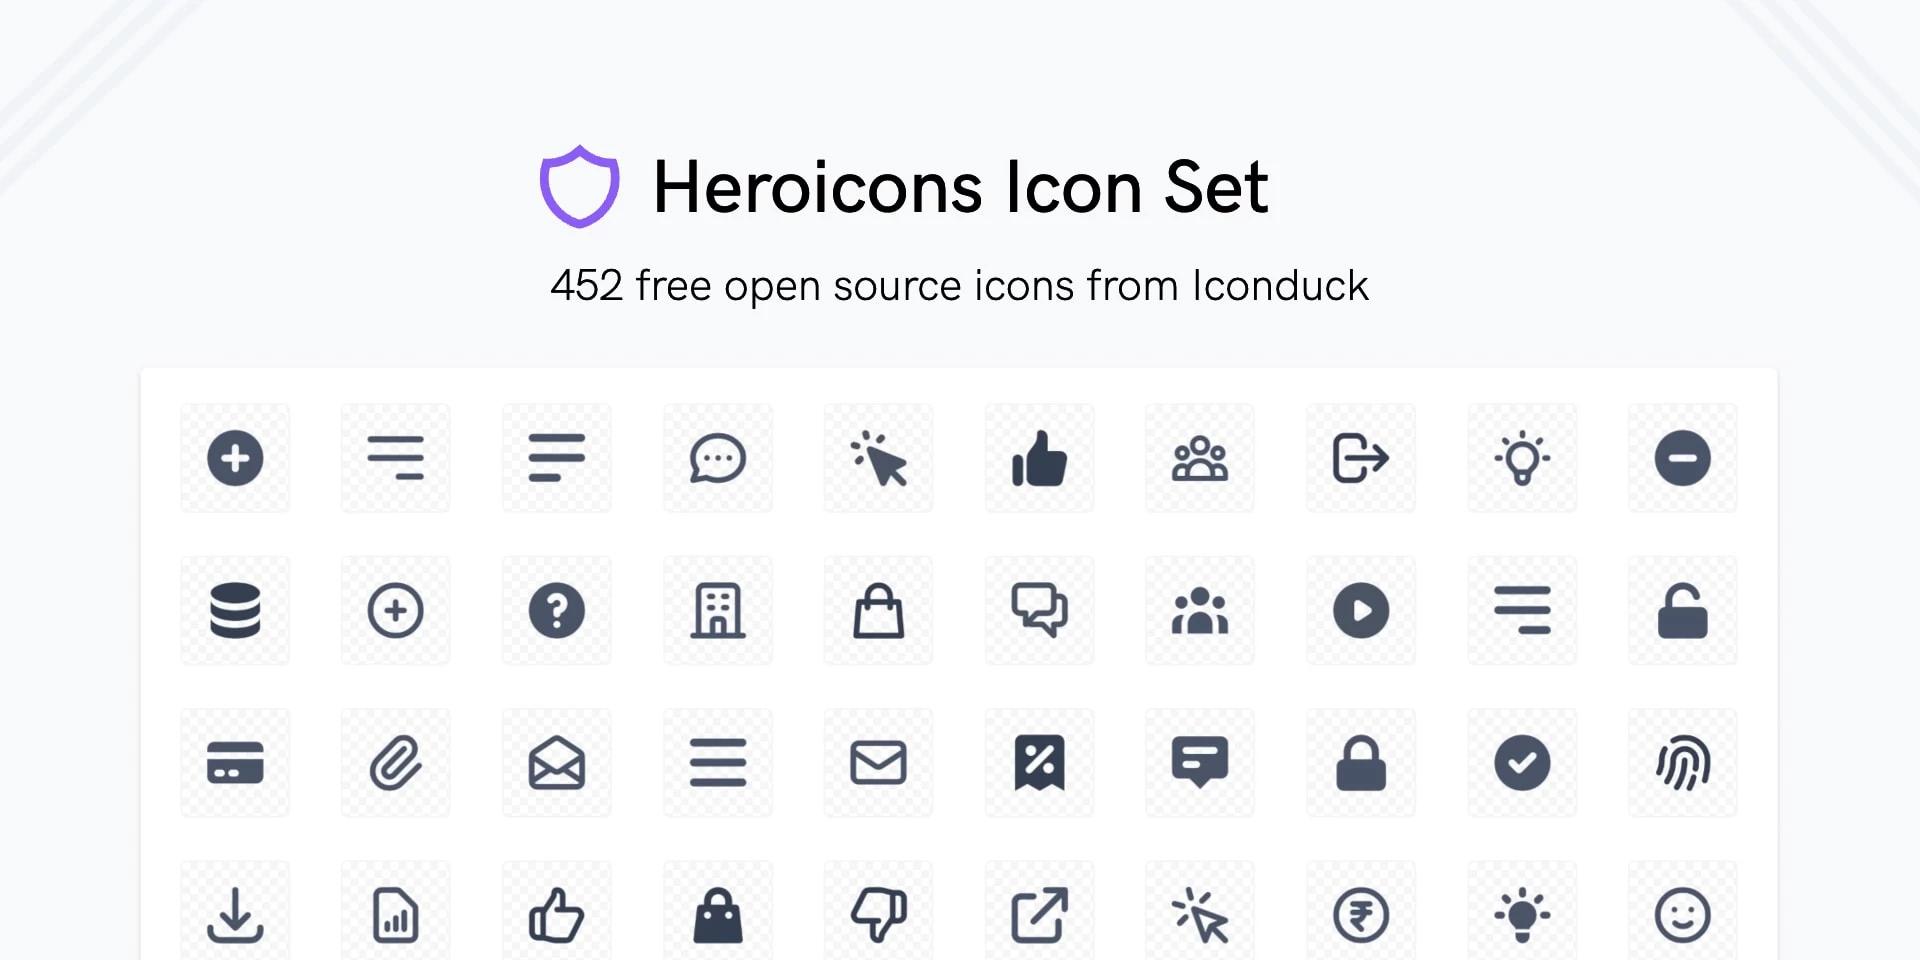 Heroicons Icon Set by Iconduck